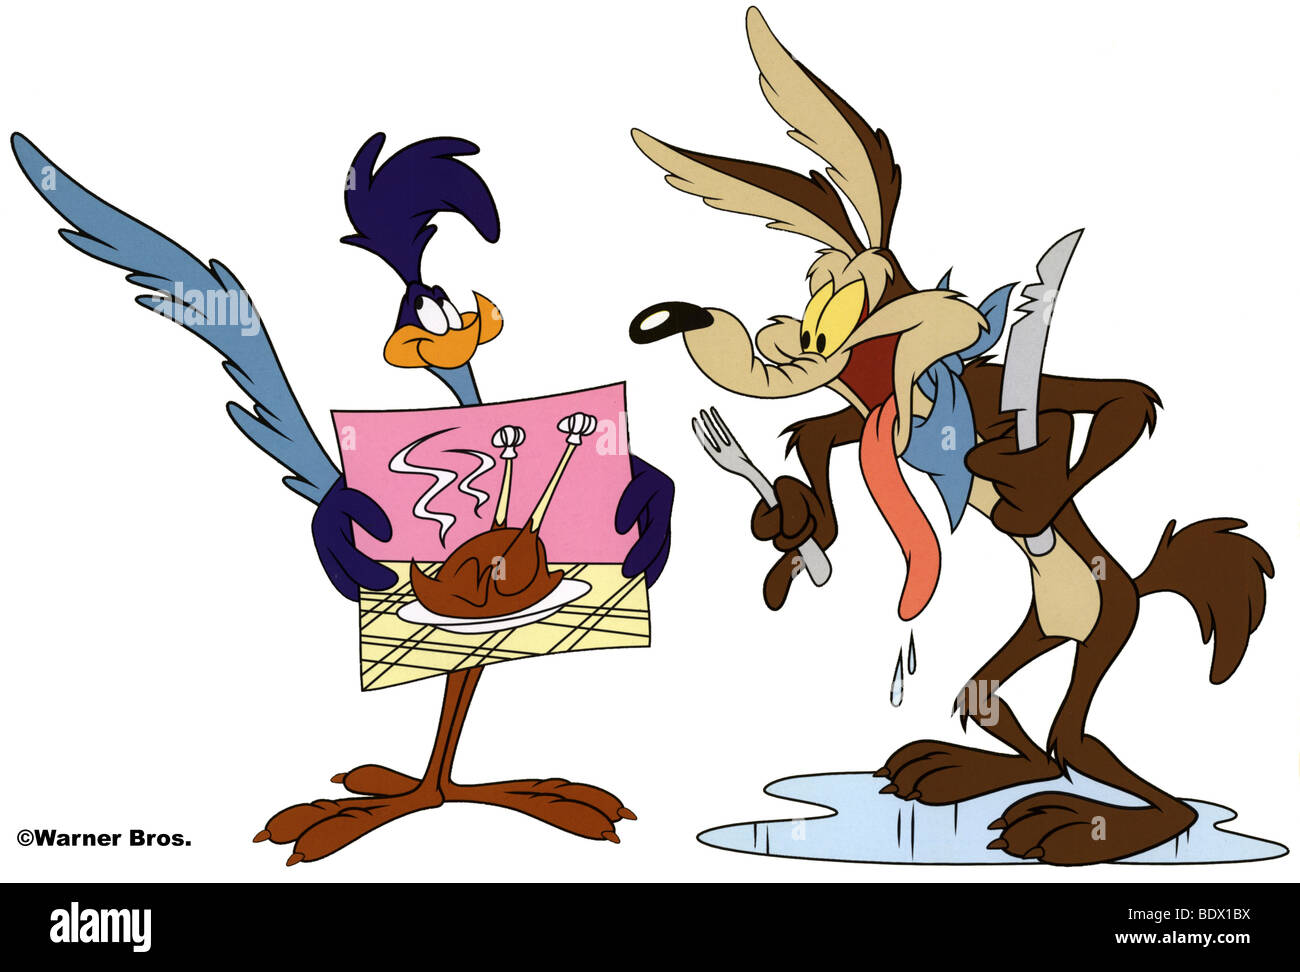 ROAD RUNNER and Wile E Coyote - Warner bros cartoon characters in the Looney Tunes series Stock Photo